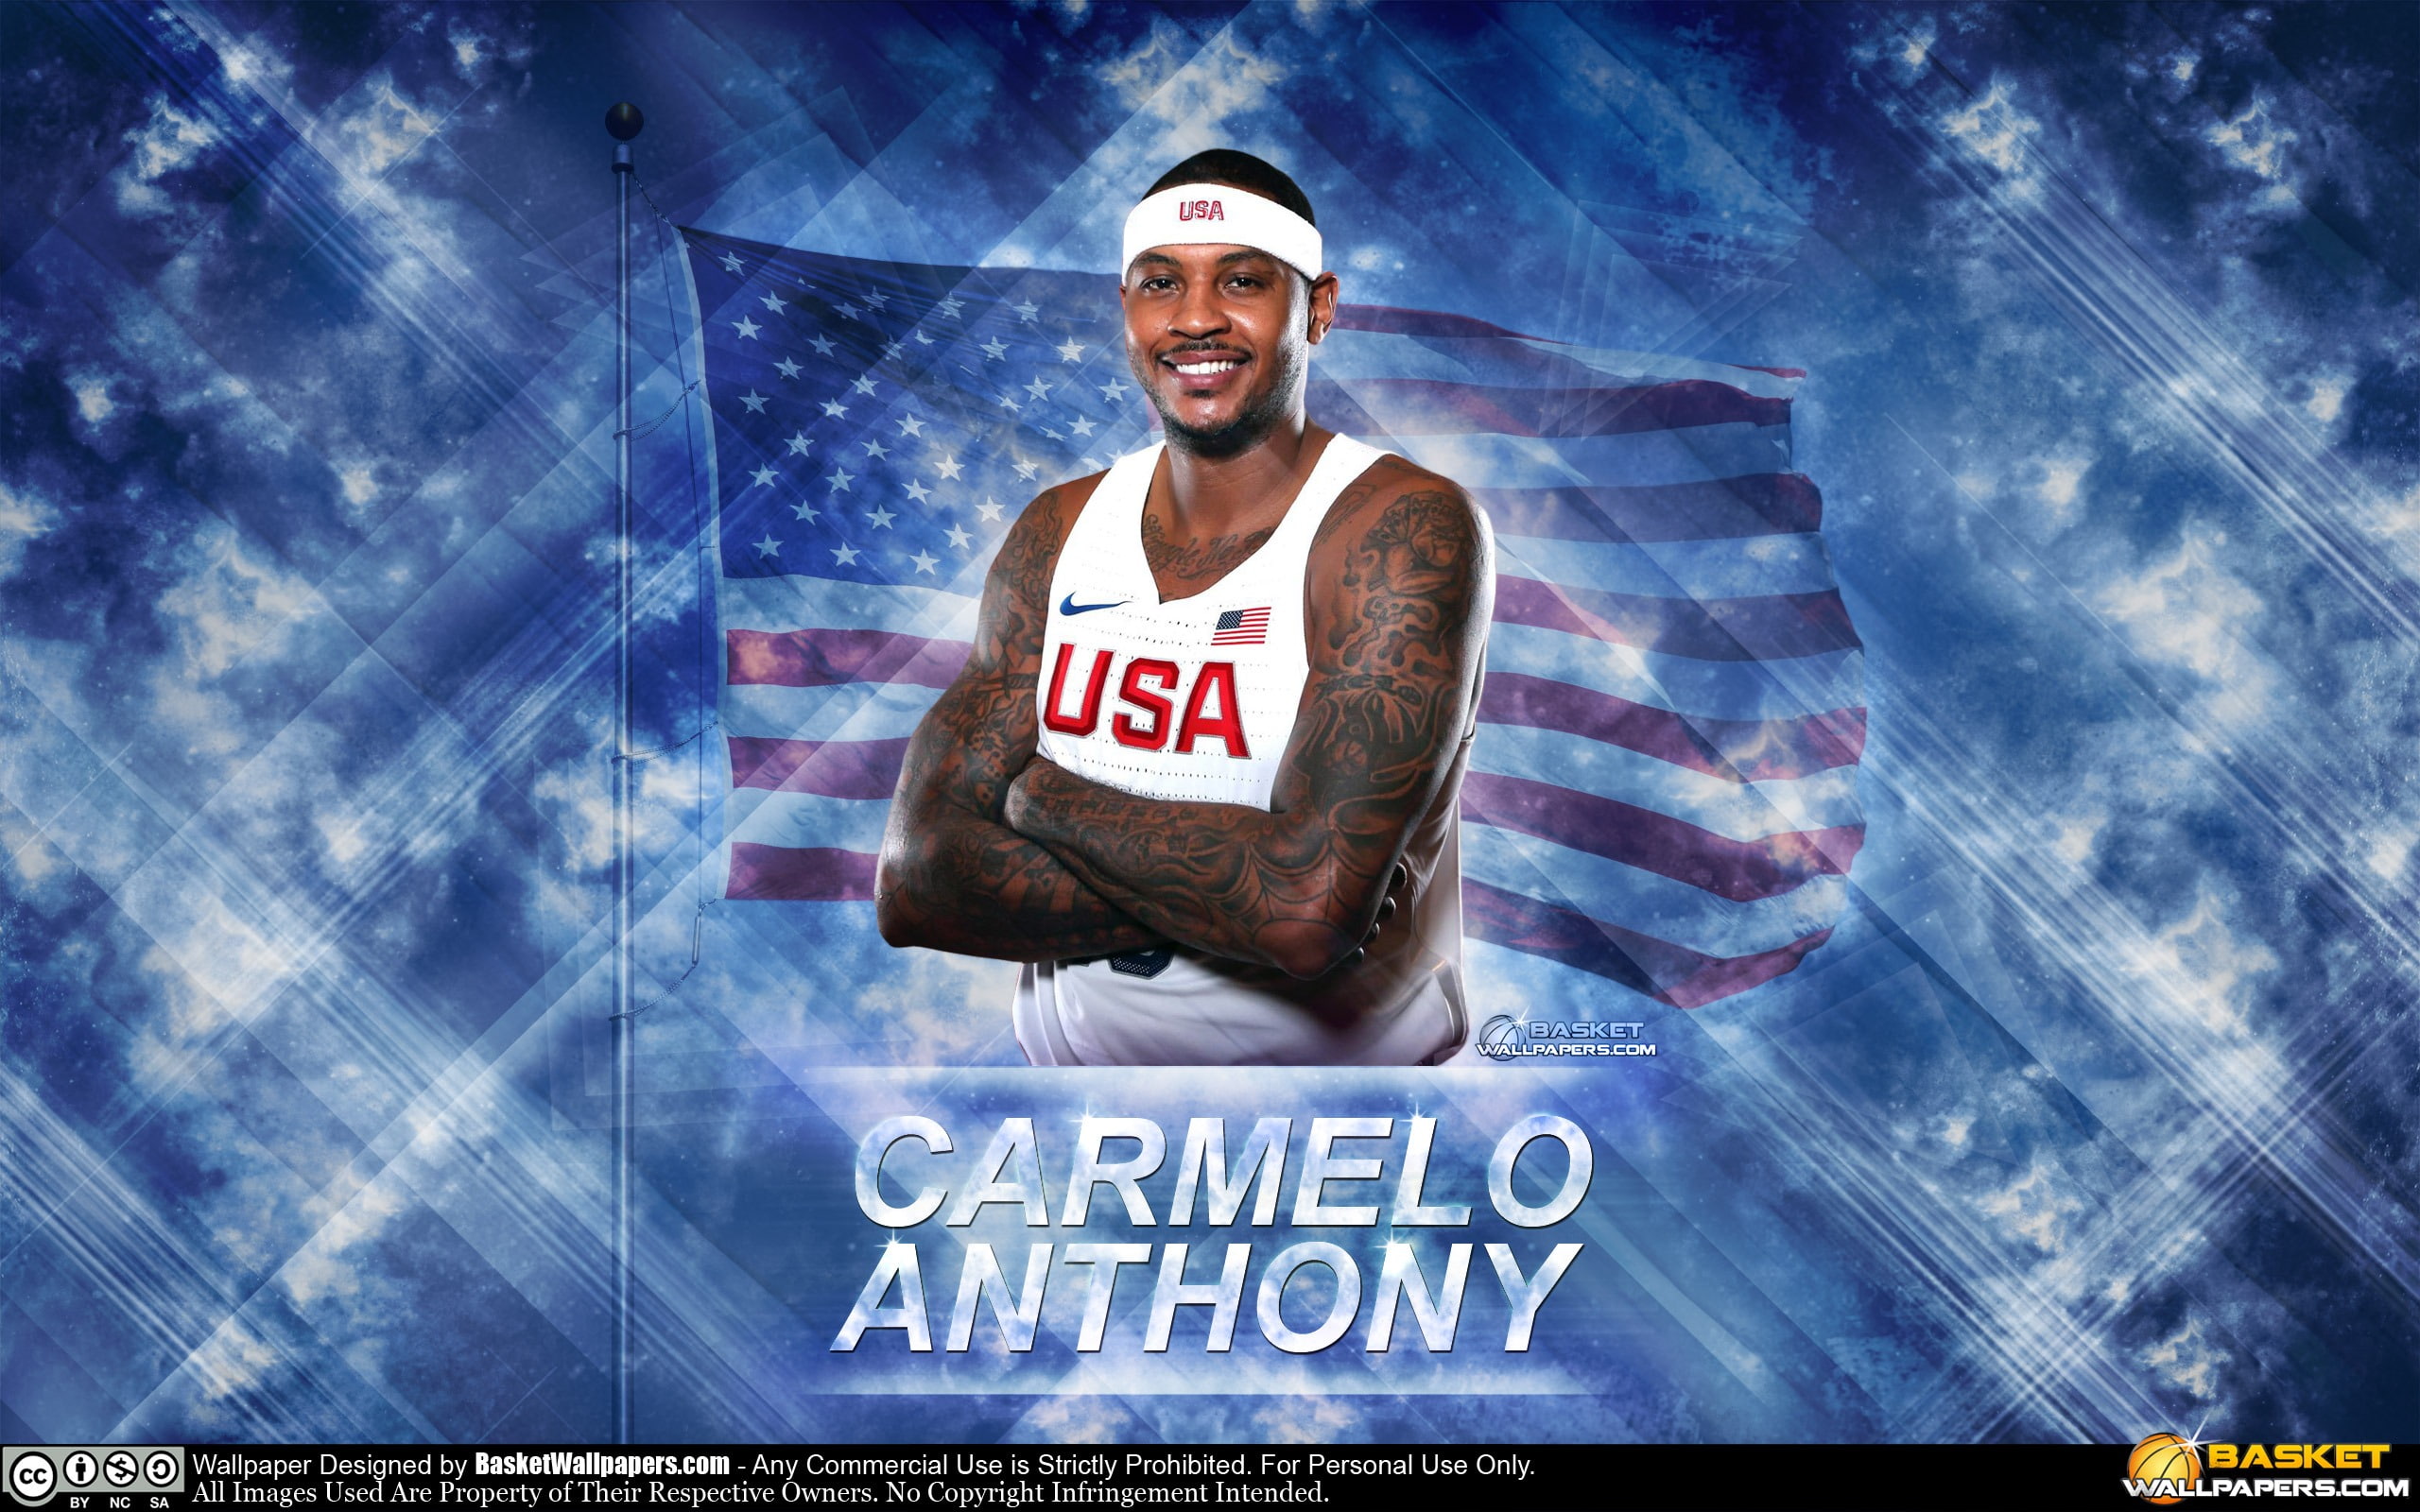 Carmelo Anthony 2016 Olympics-2016 NBA Poster HD W.., text, one person